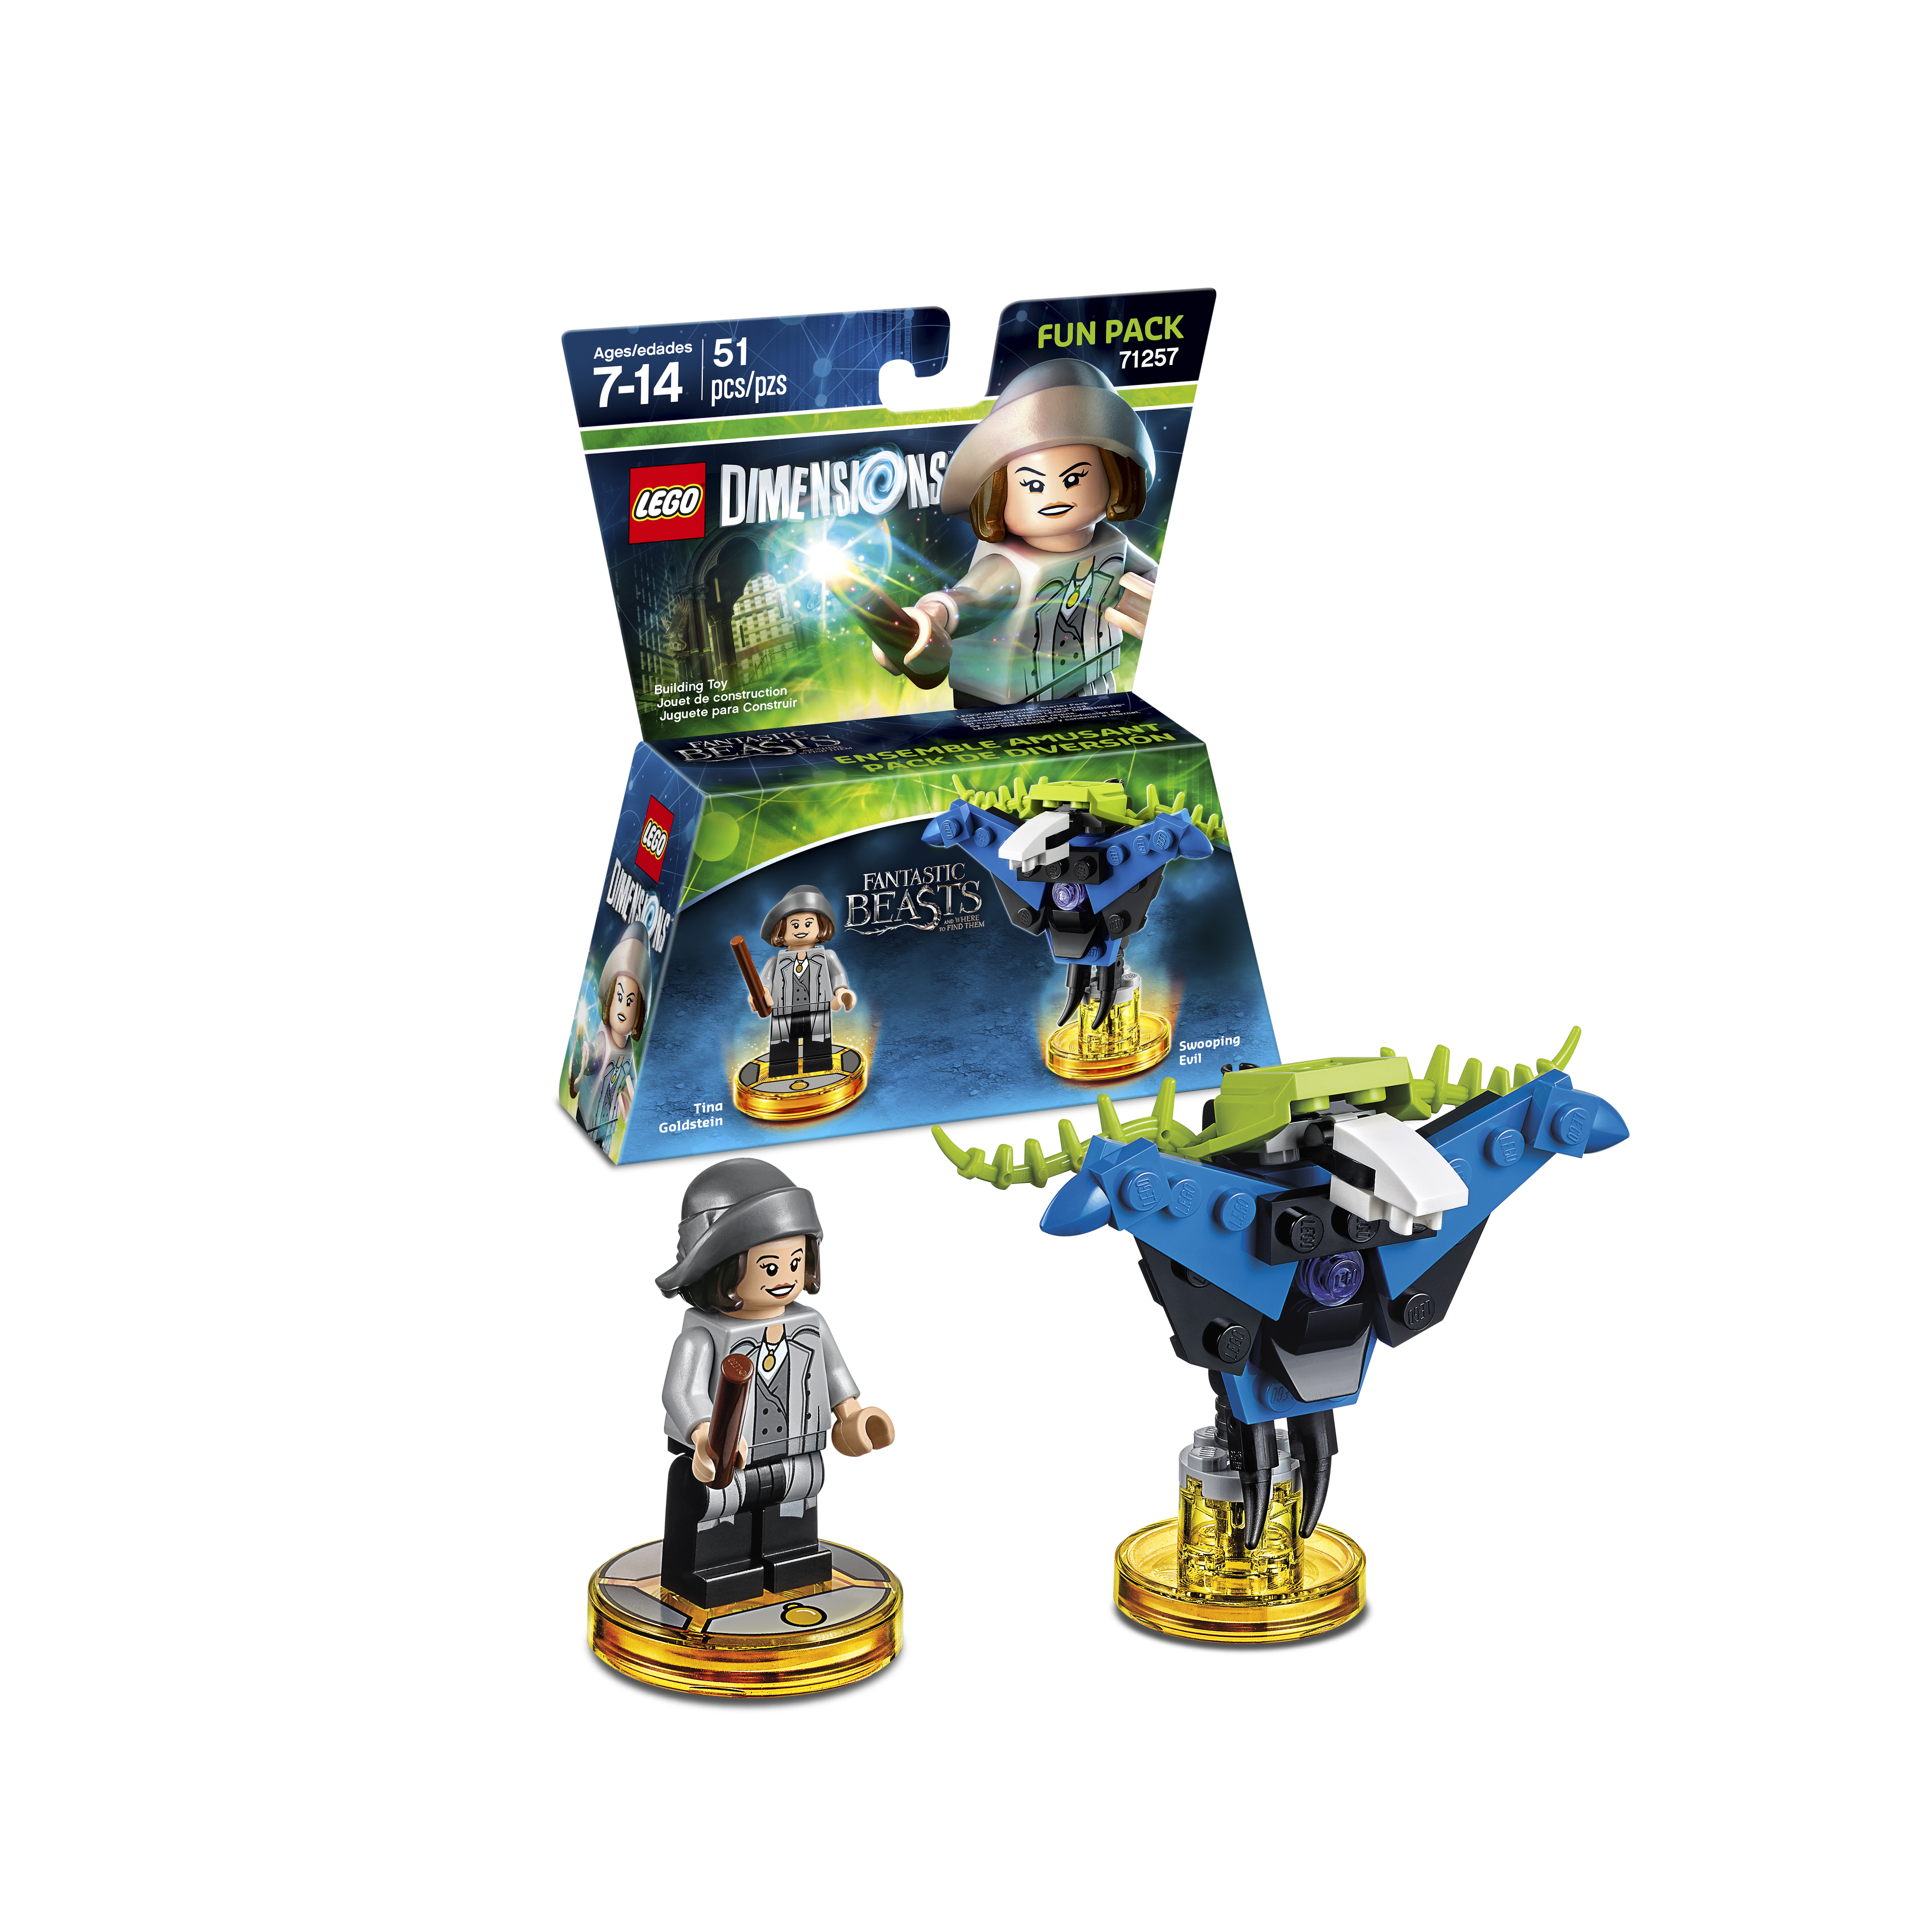 Fantastic Beasts and Where to Find Them - Fun Pack